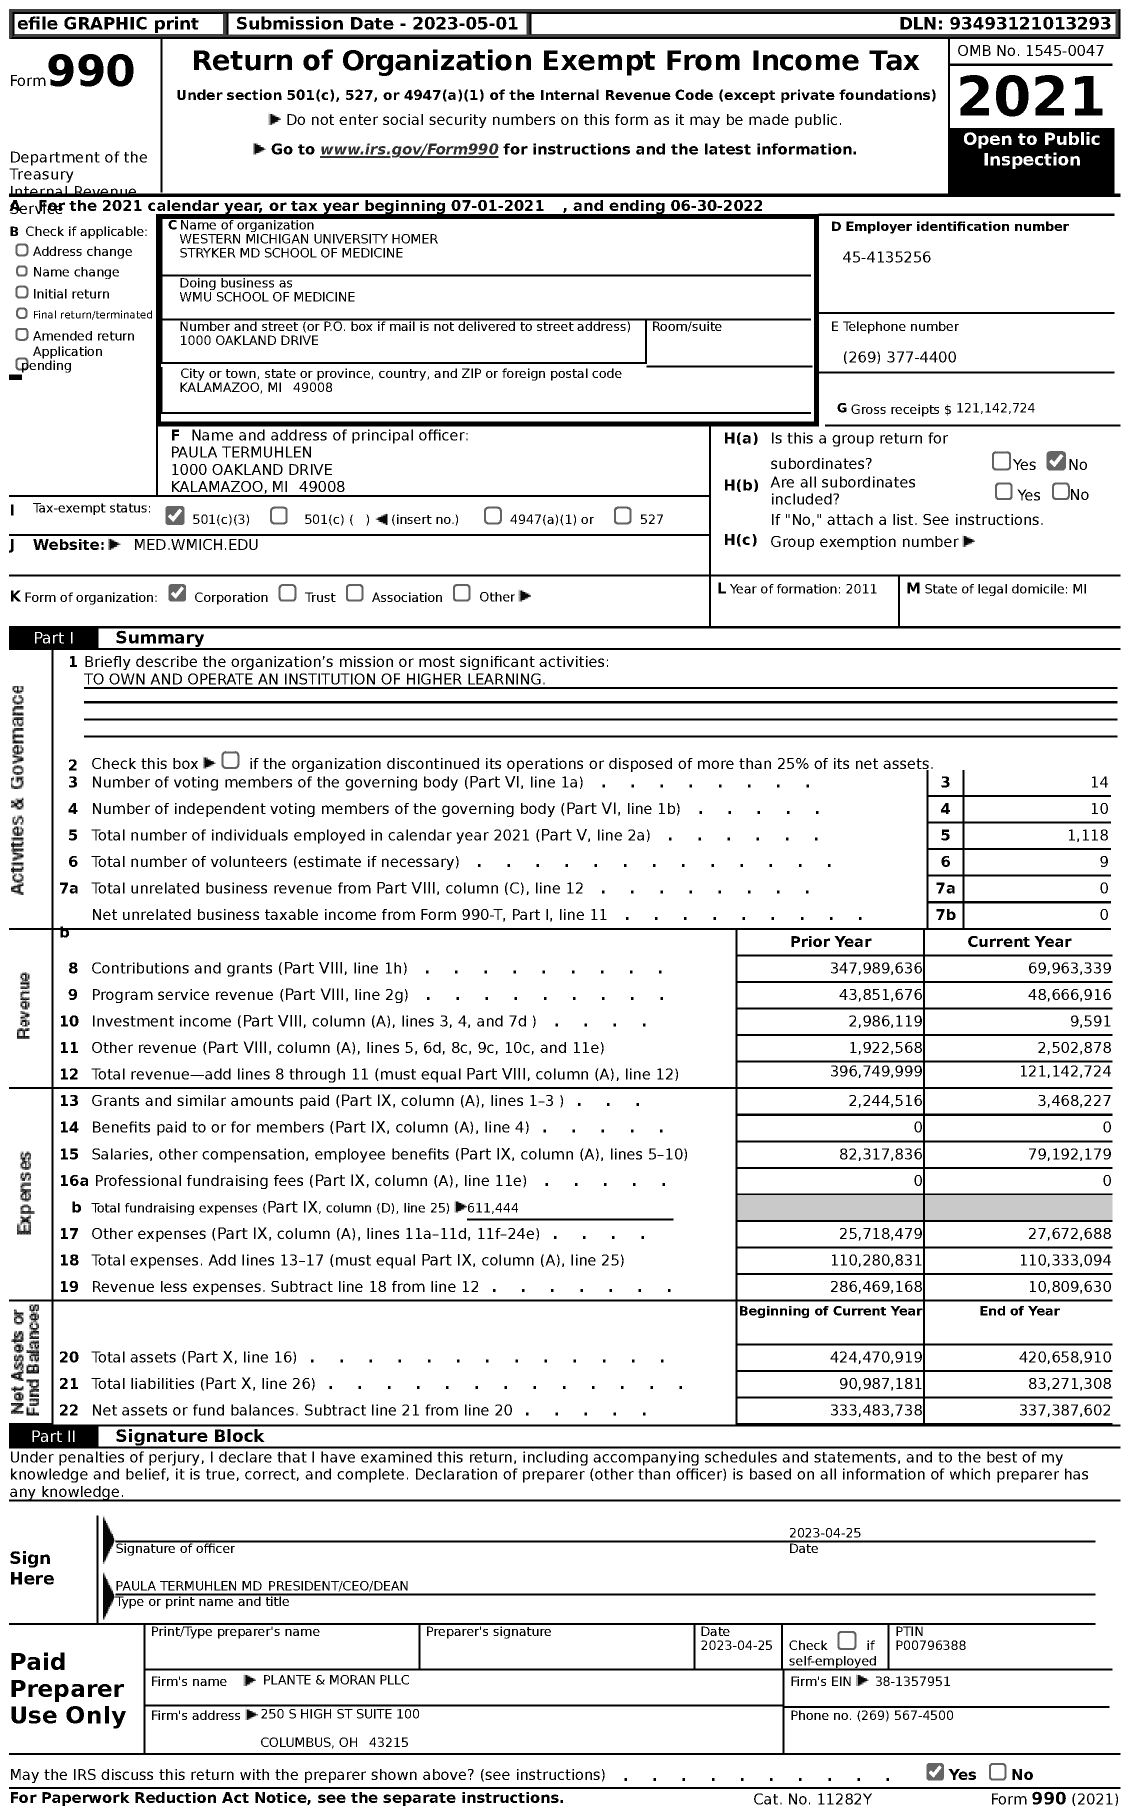 Image of first page of 2021 Form 990 for Wmu School of Medicine